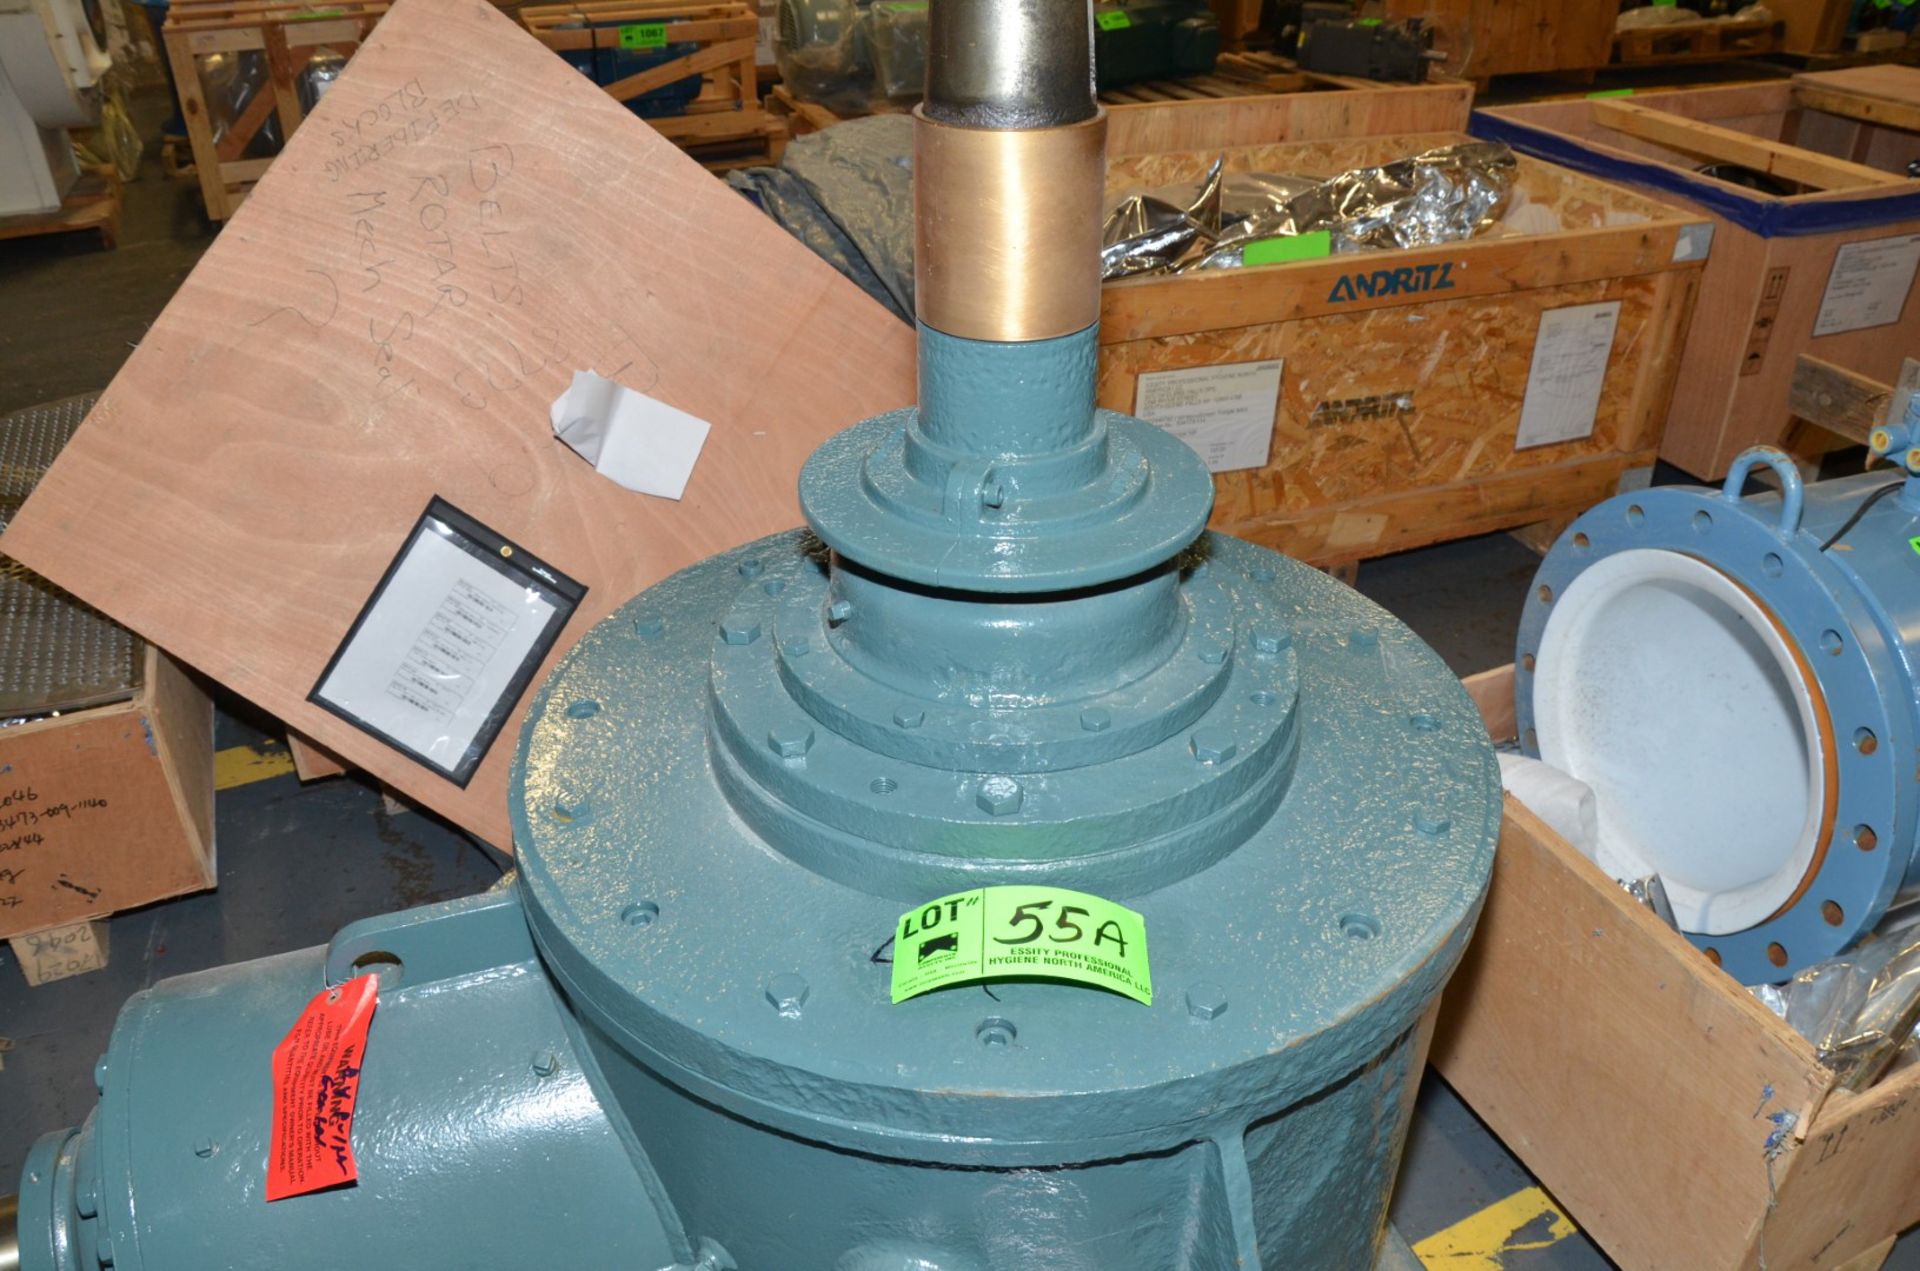 BLACK CLAWSON PULPER #1 SPARE GEARBOX [RIGGING FEE FOR LOT #55A - $25 USD PLUS APPLICABLE TAXES]